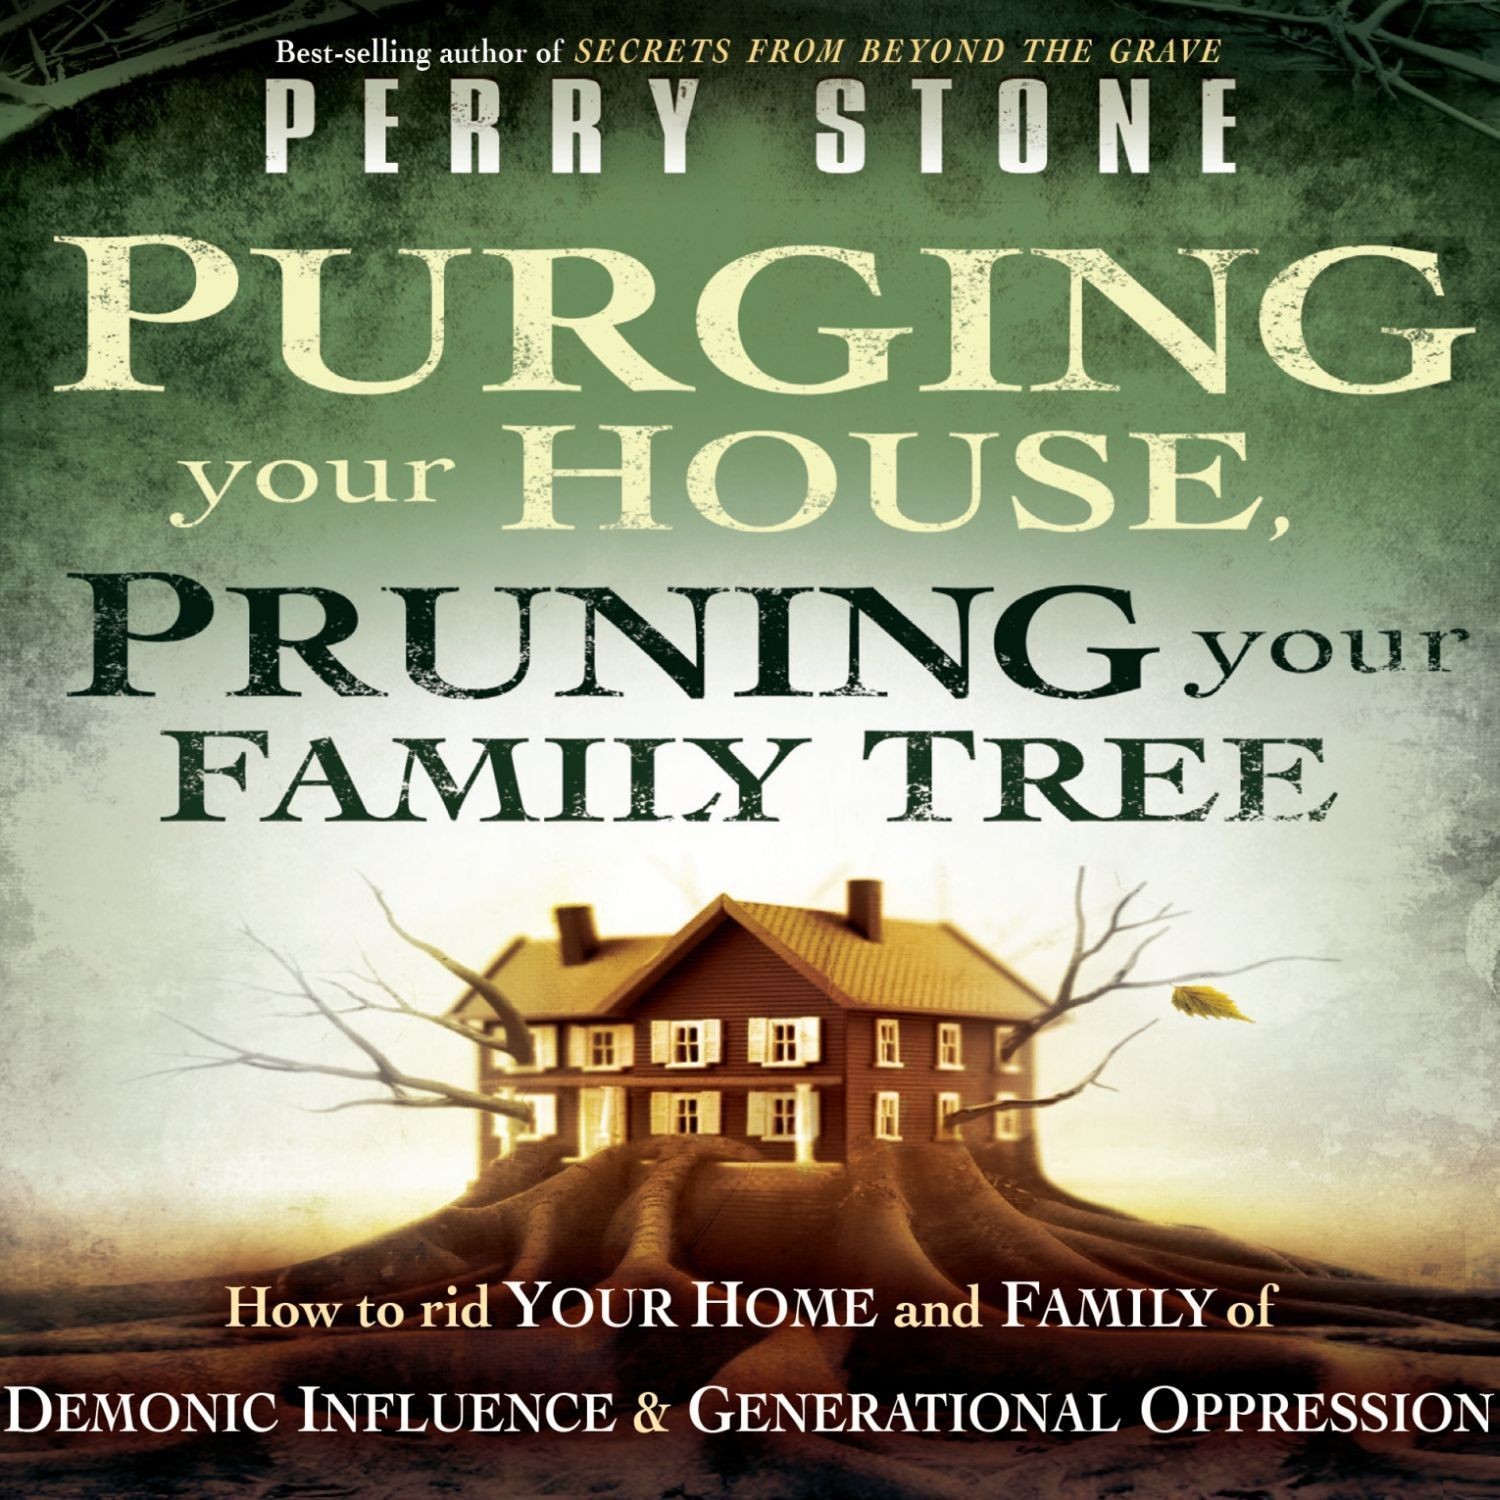 Purging Your House, Pruning Your Family Tree: How to Rid Your Home and Family of Demonic Influence and Generational Oppression Audiobook, by Perry Stone